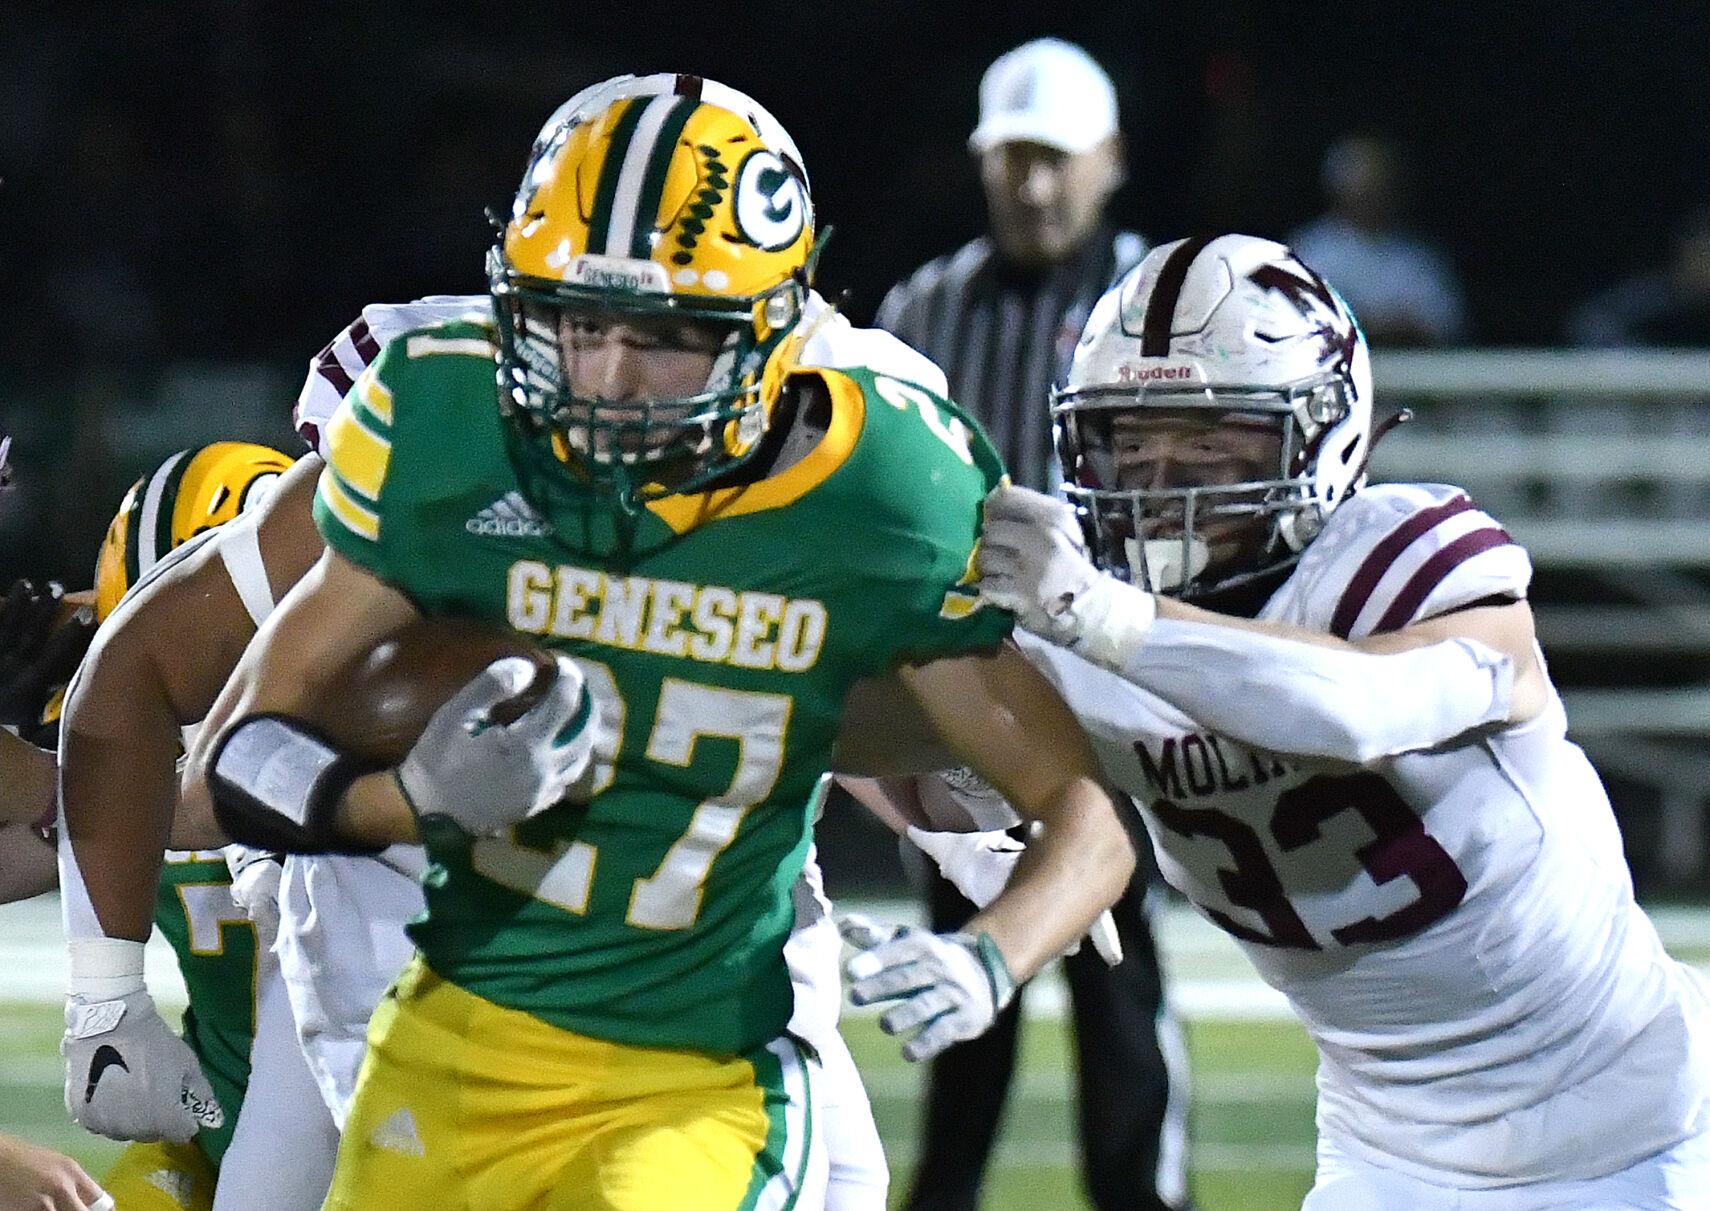 'It's a whole new feeling' Geneseo football prepares for first playoff